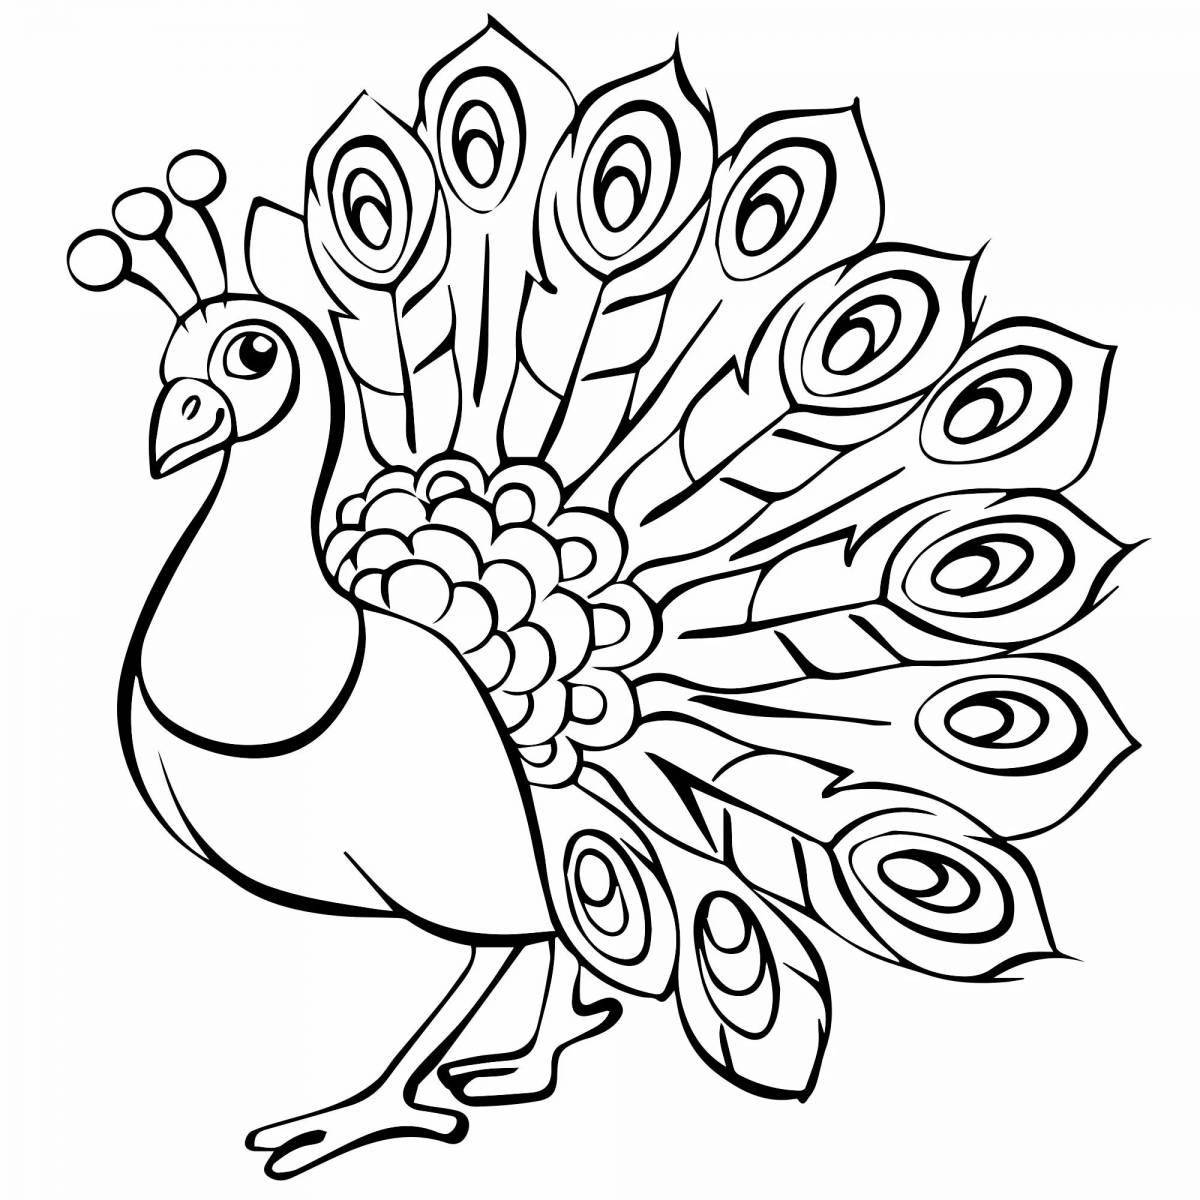 Coloring book bright fiery bird for children 5-6 years old